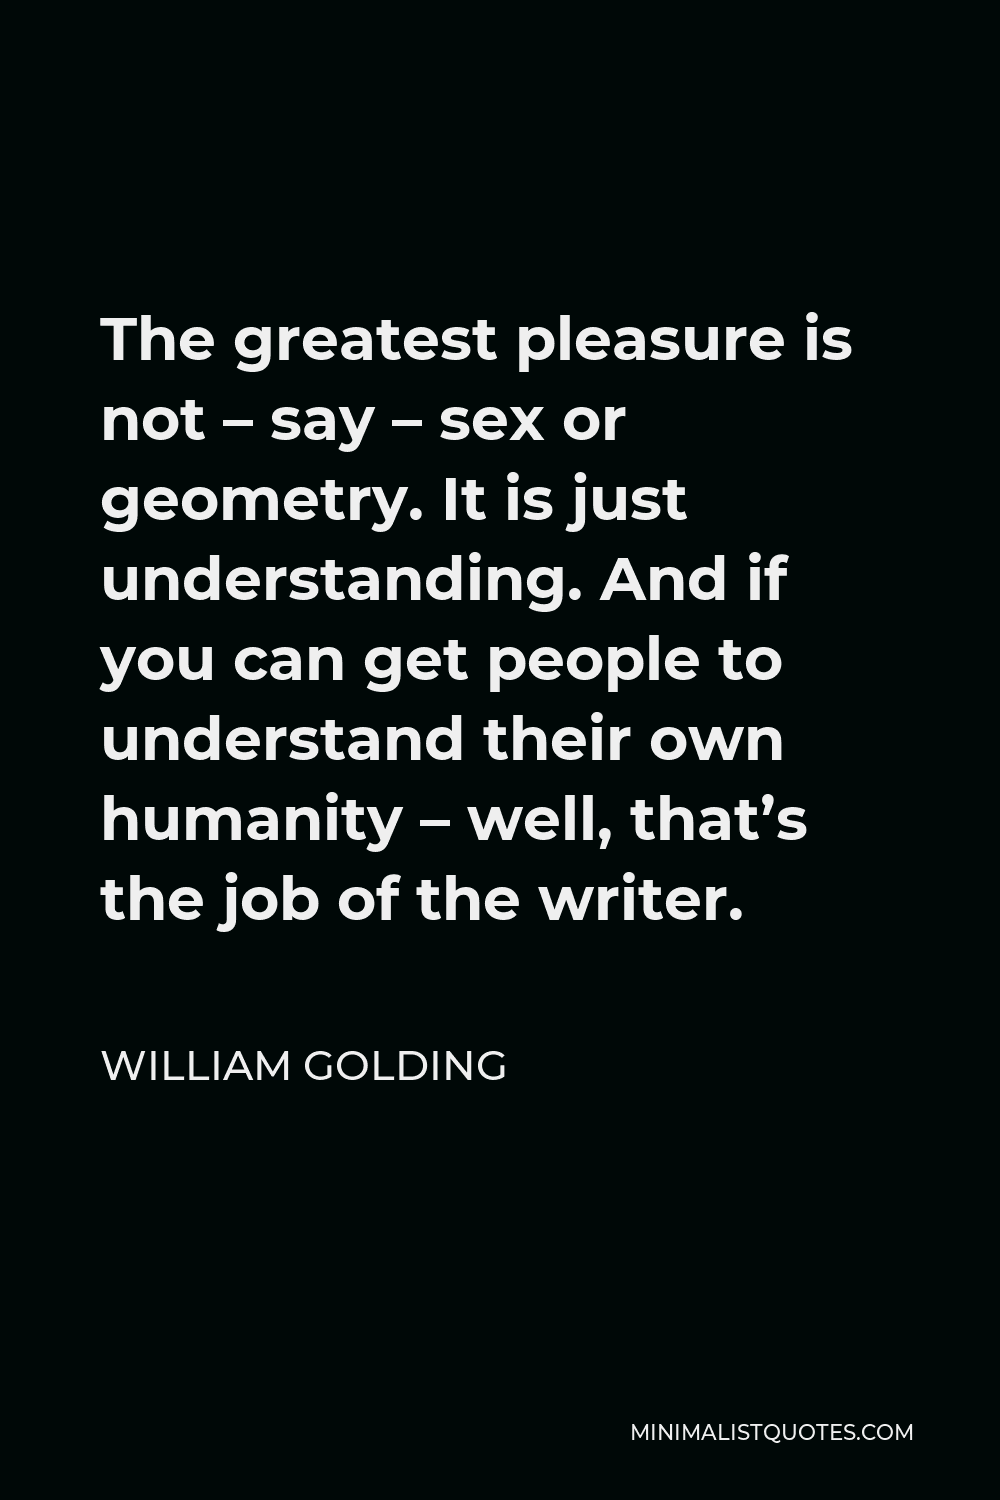 William Golding Quote - The greatest pleasure is not – say – sex or geometry. It is just understanding. And if you can get people to understand their own humanity – well, that’s the job of the writer.